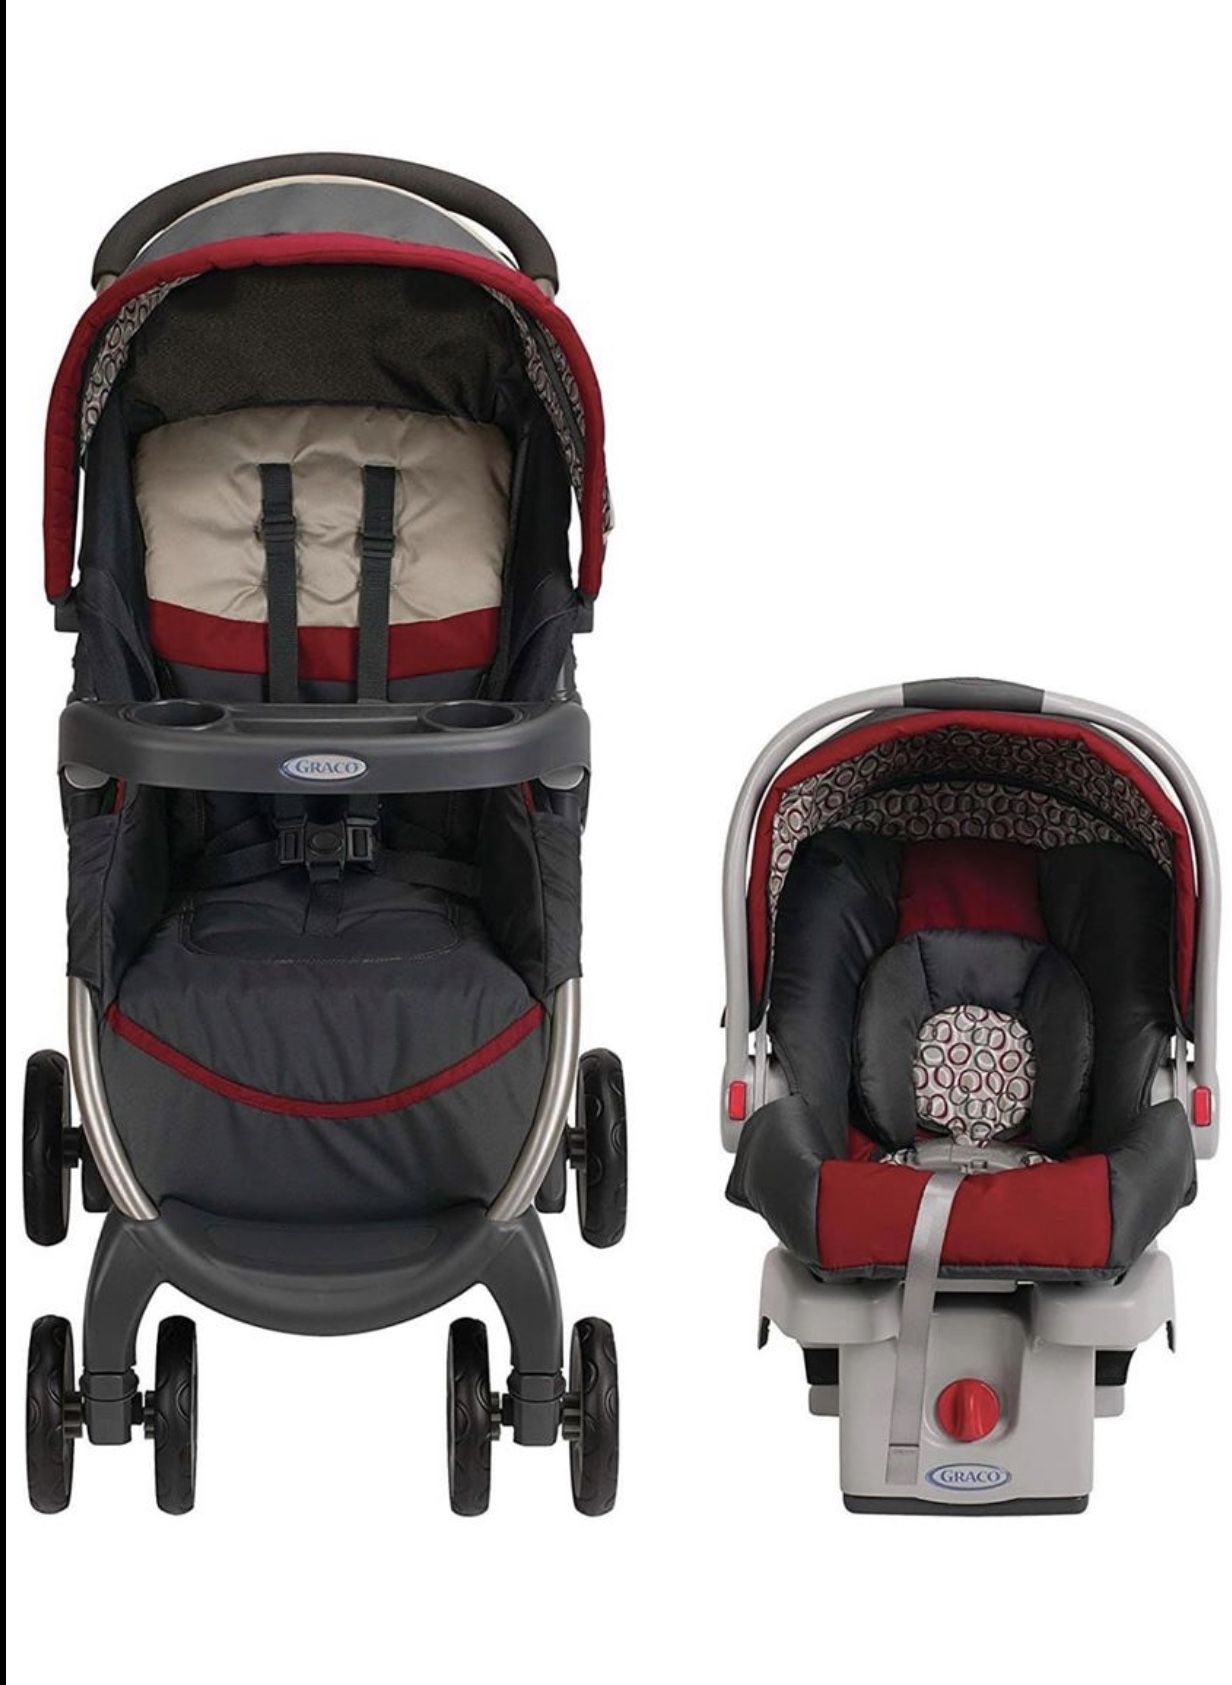 Baby Graco Stroller with Car Seat